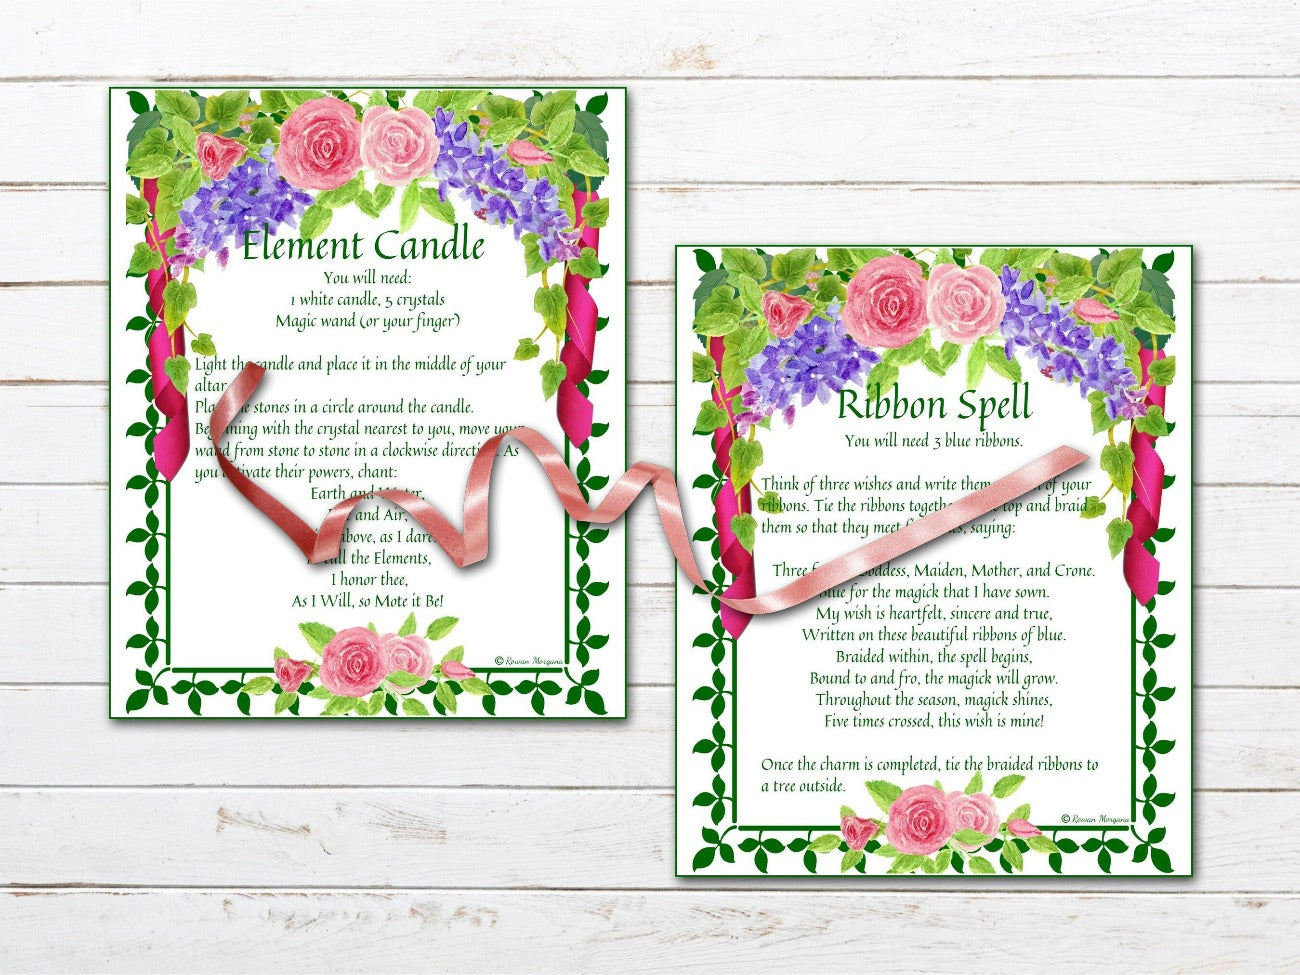 BELTANE SPELL CARDS, Have a white background, green ivy border and pretty pastel florals at the top and bottom. Element Candle Spell and Ribbon Spell cards are featured - Morgana Magick Spell